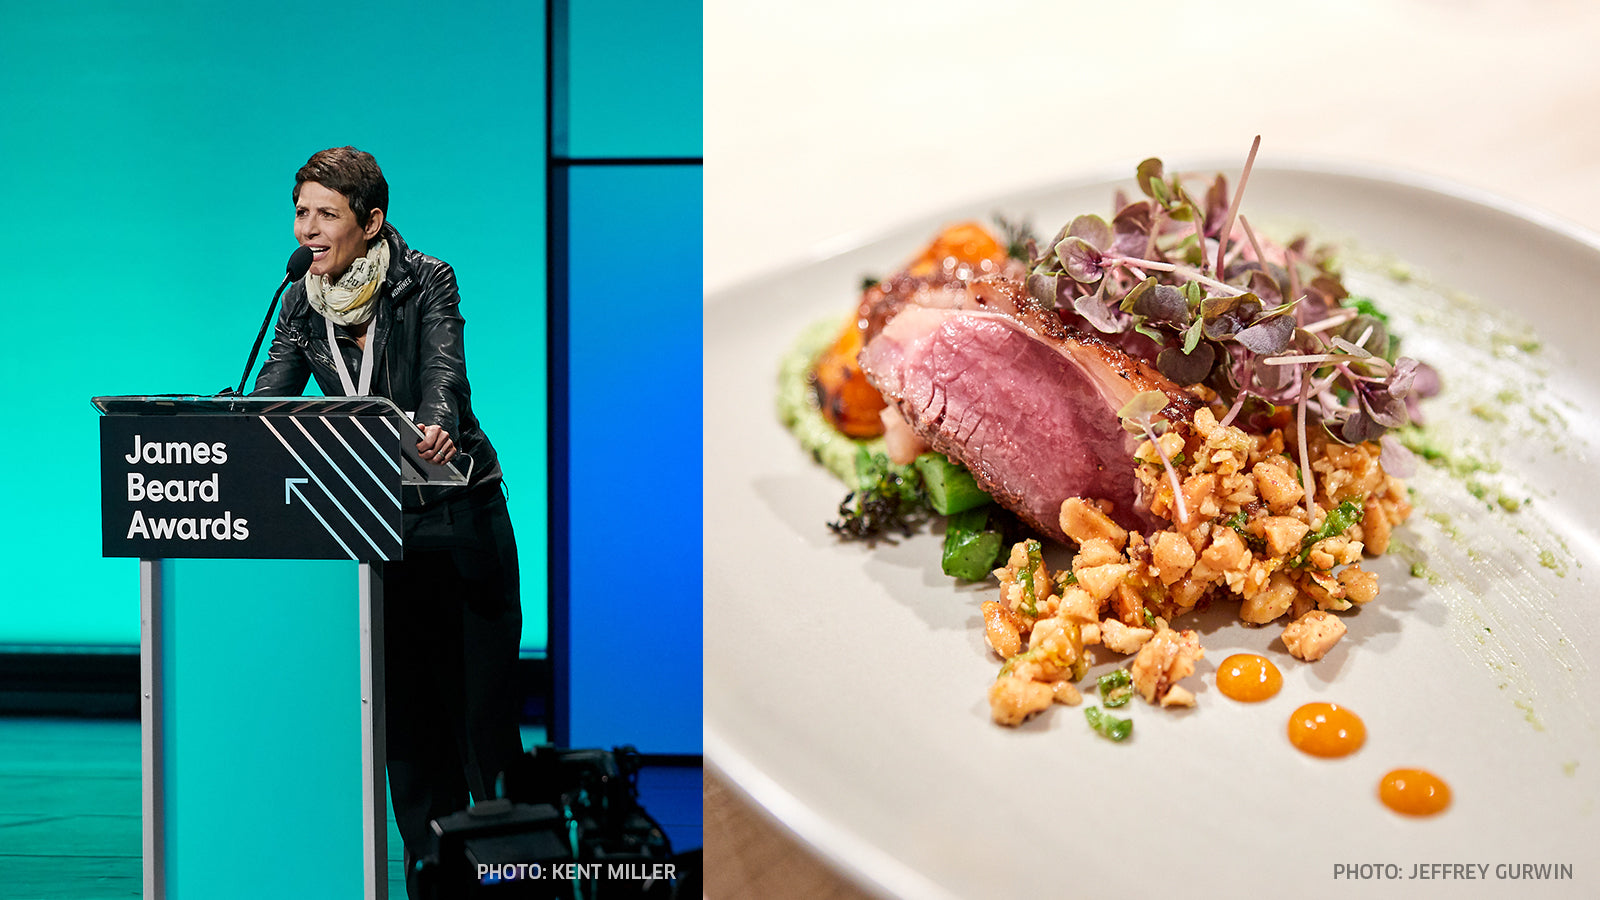 On the left, Chef Dominique Crenn accepts a James Beard award. On the right a beautiful steak dish.